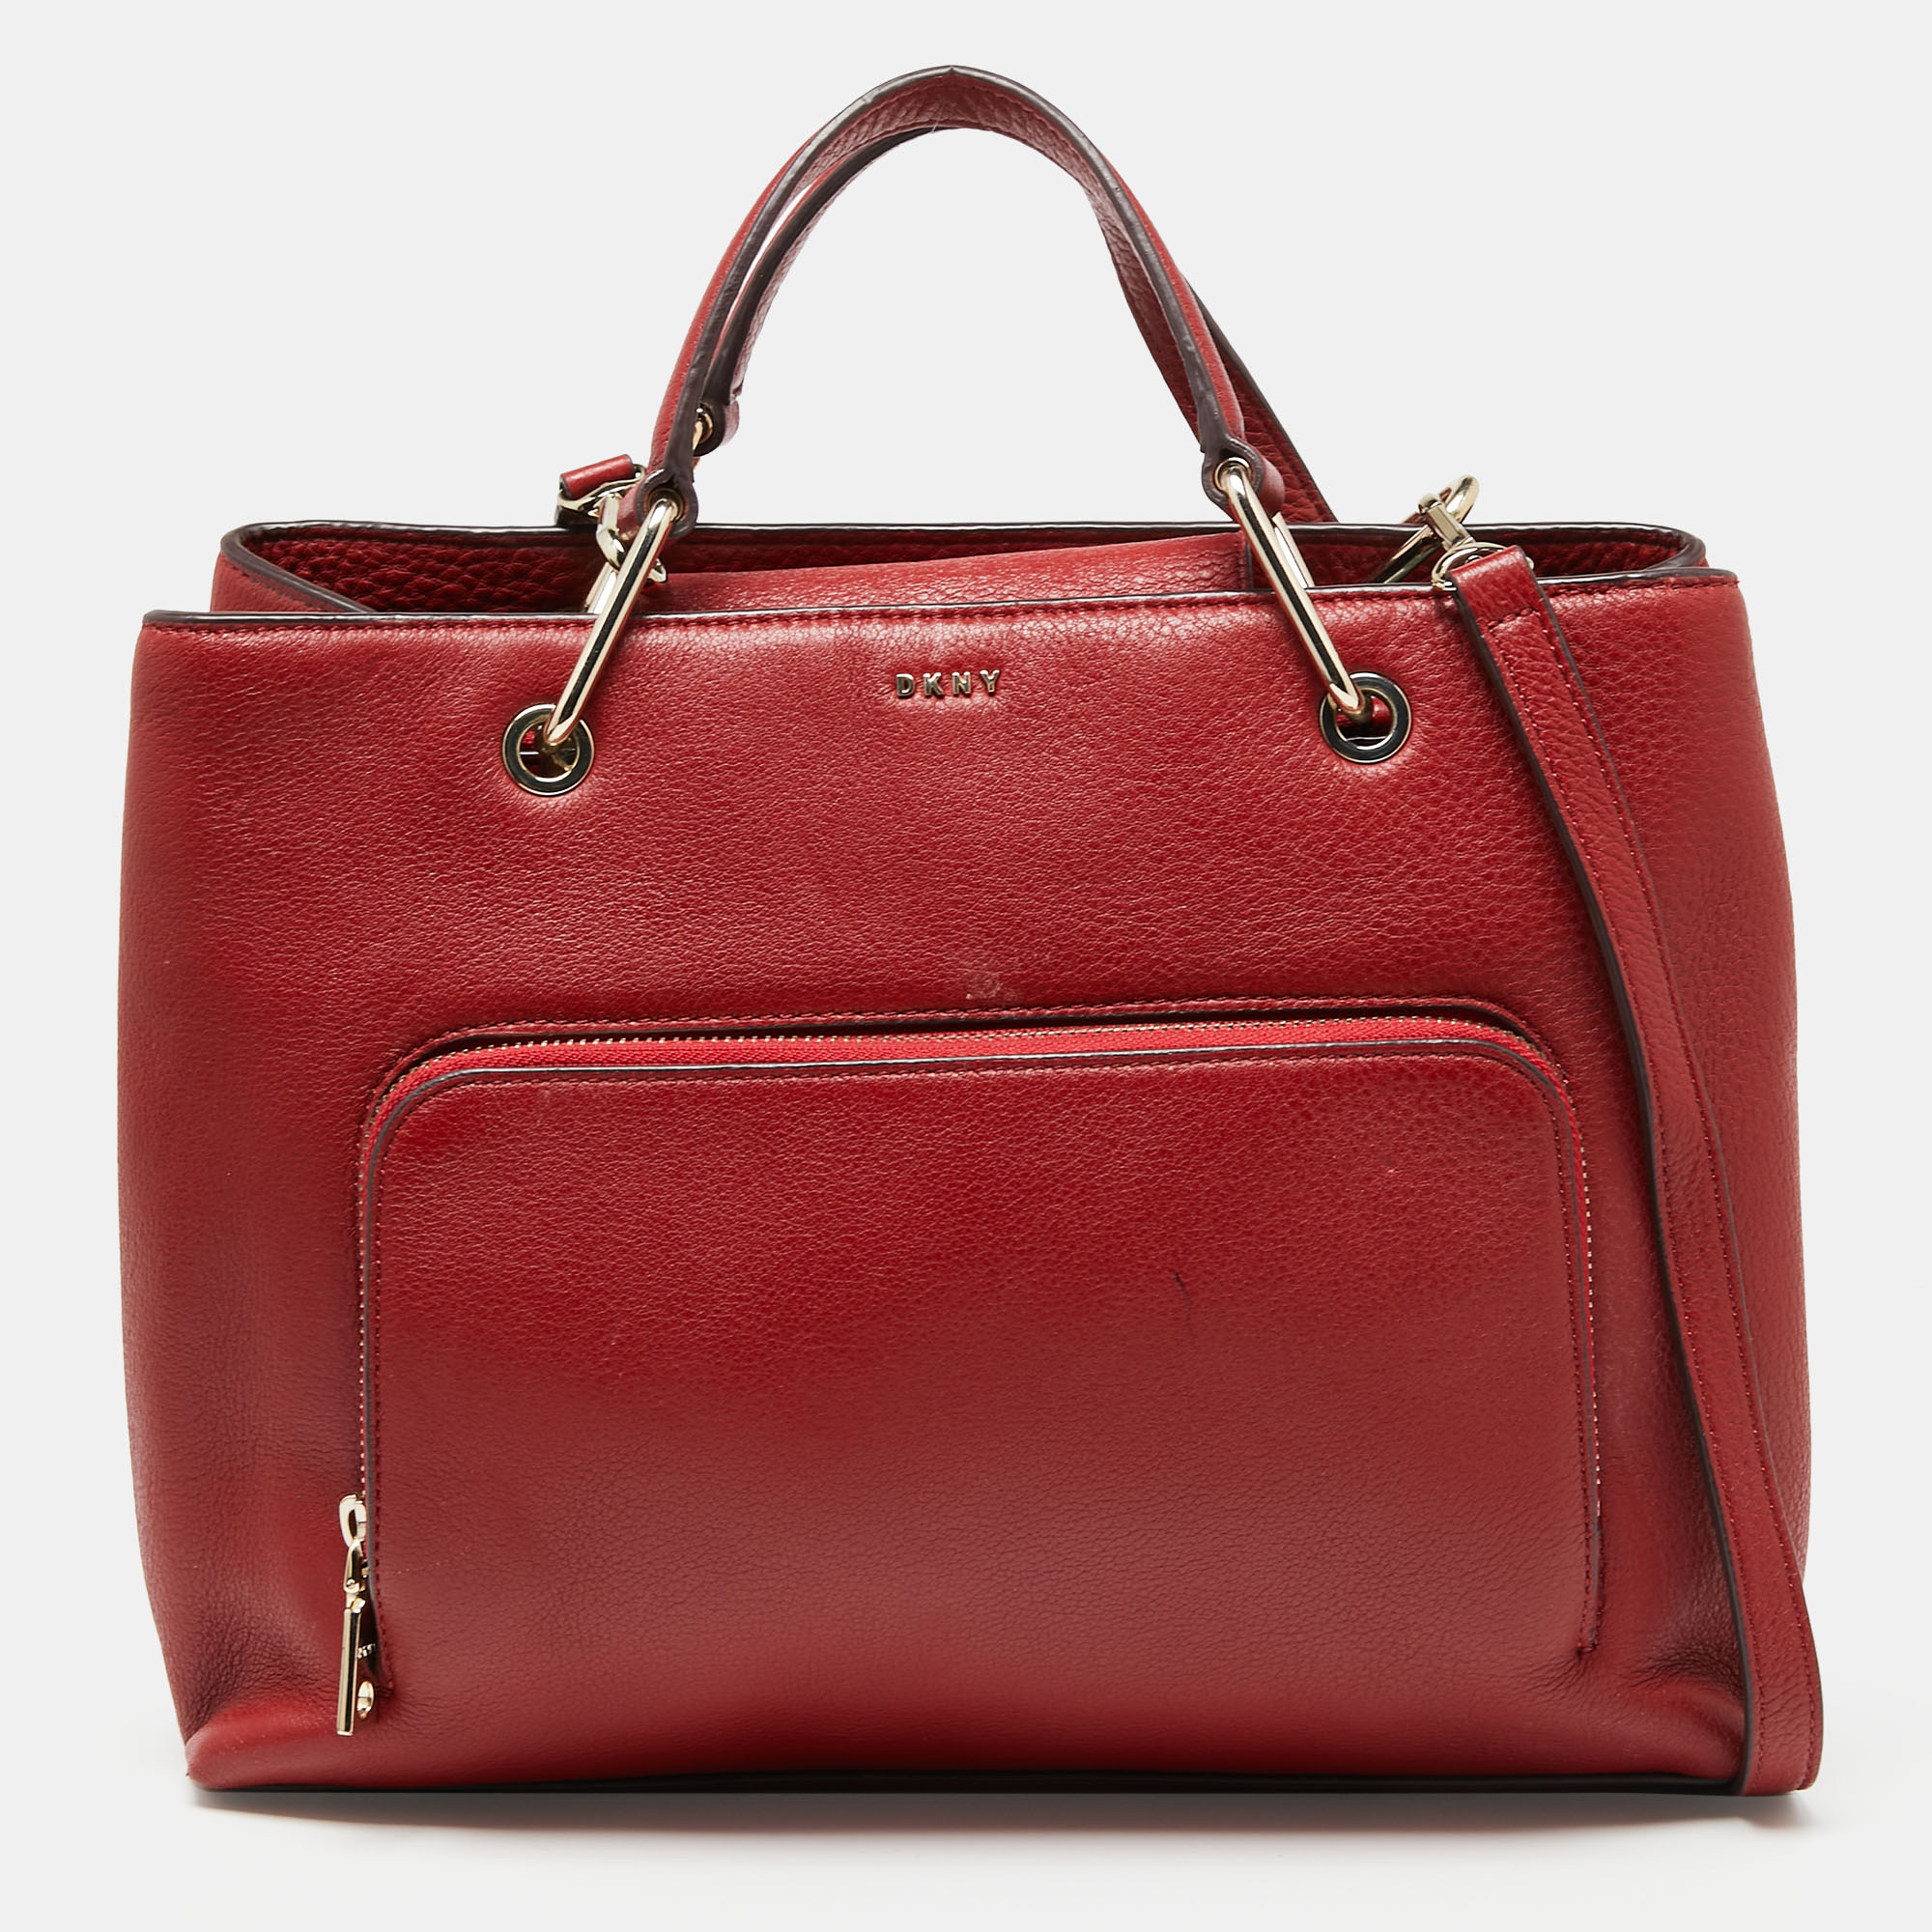 Pre-owned Dkny Red Leather Bryant Park Front Pocket Satchel